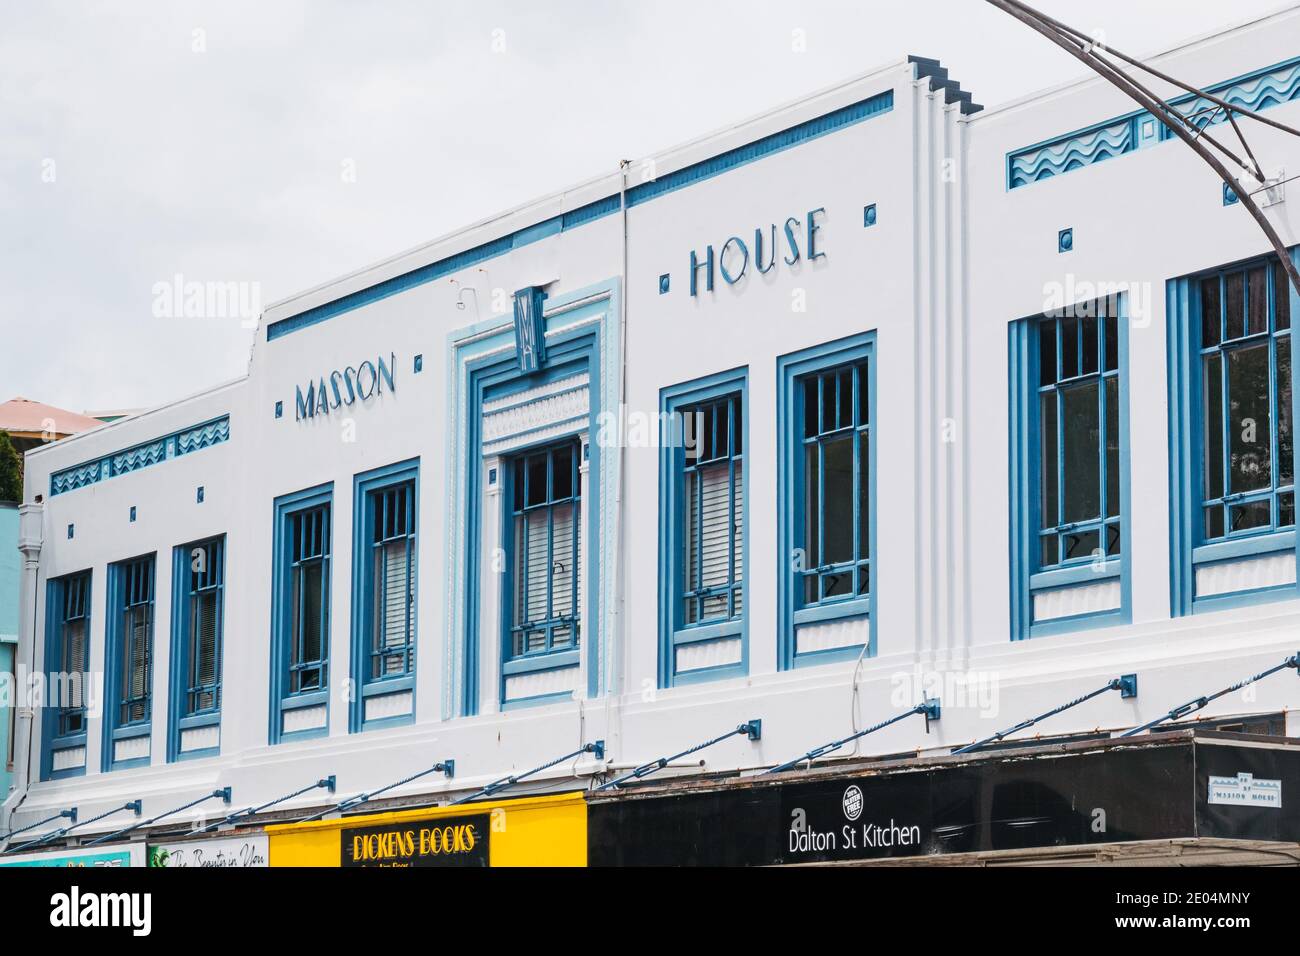 Masson House, a high street building in Napier, New Zealand, designed with an Art Deco style facade which was popular in the 1930s, when it was built Stock Photo